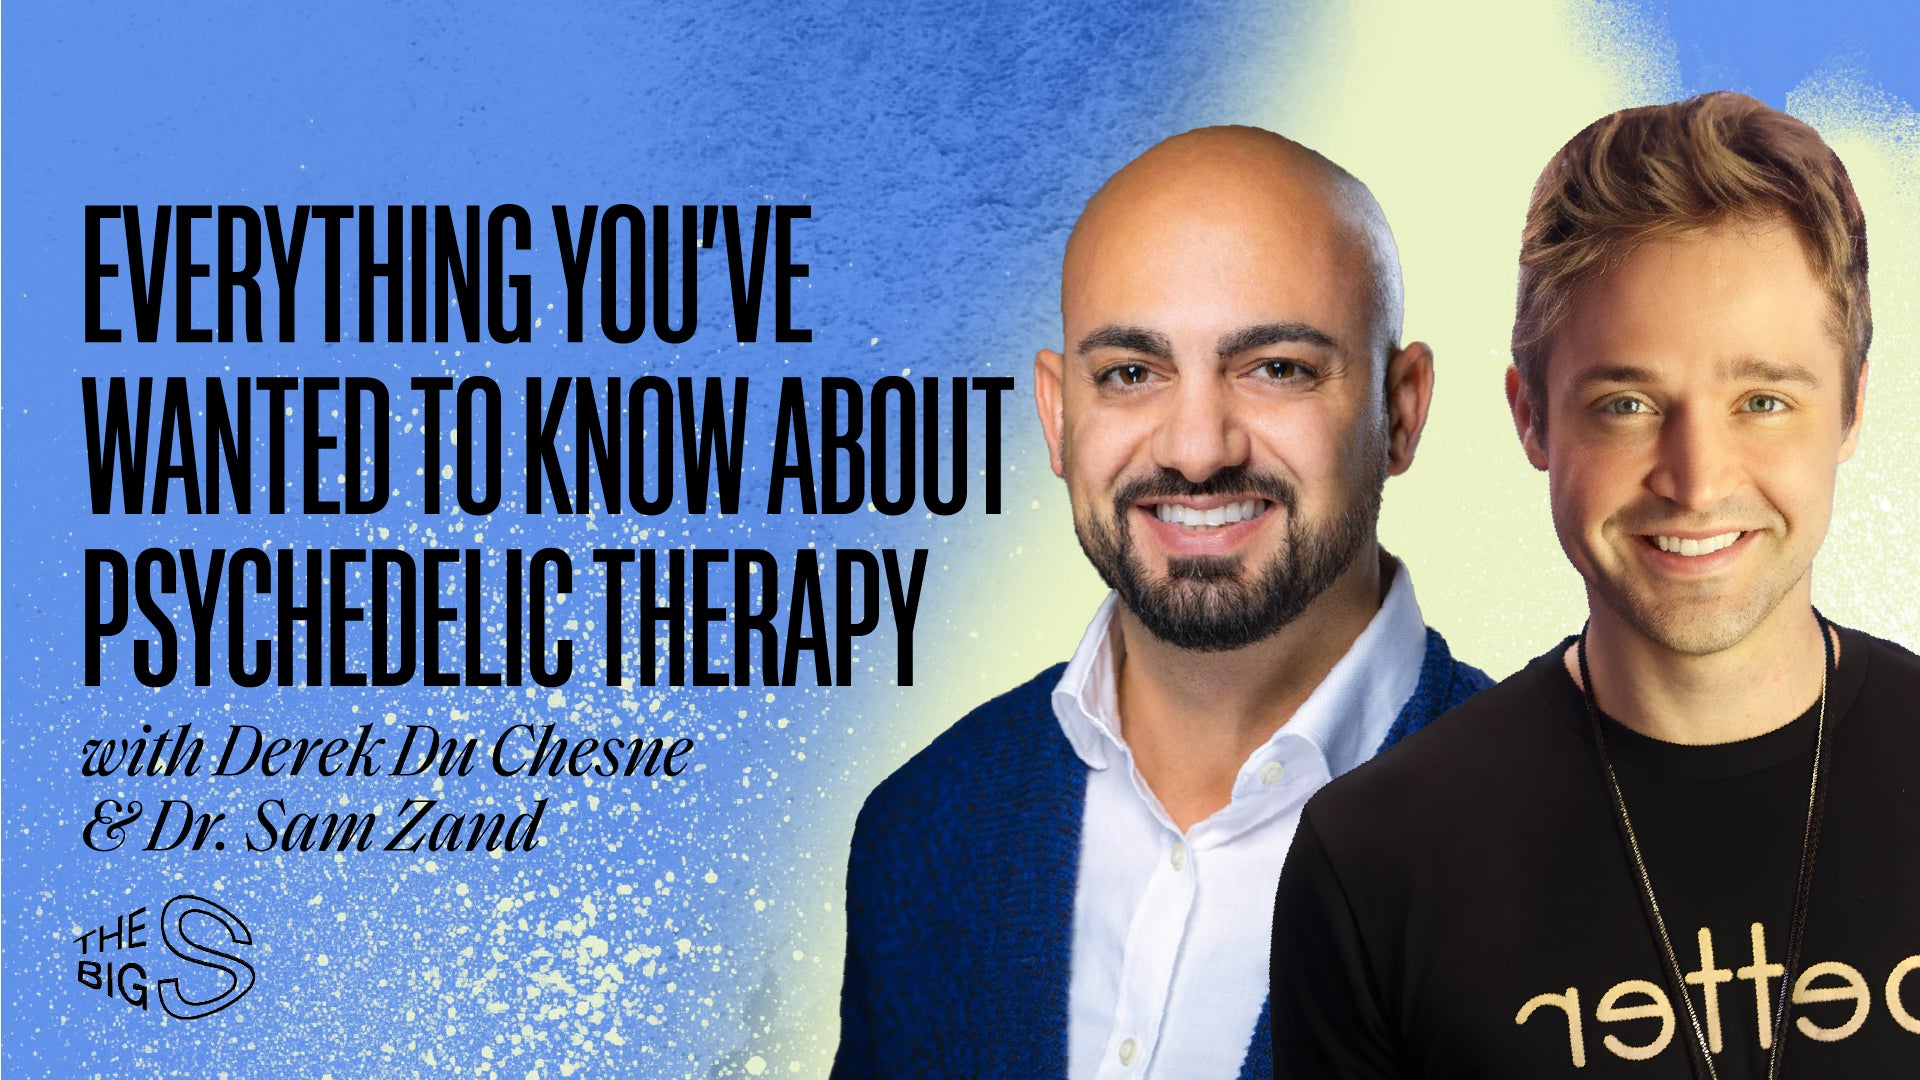 80. EVERYTHING YOU’VE WANTED TO KNOW ABOUT PSYCHEDELIC THERAPY WITH DEREK DU CHESNE & DR. SAM ZAND